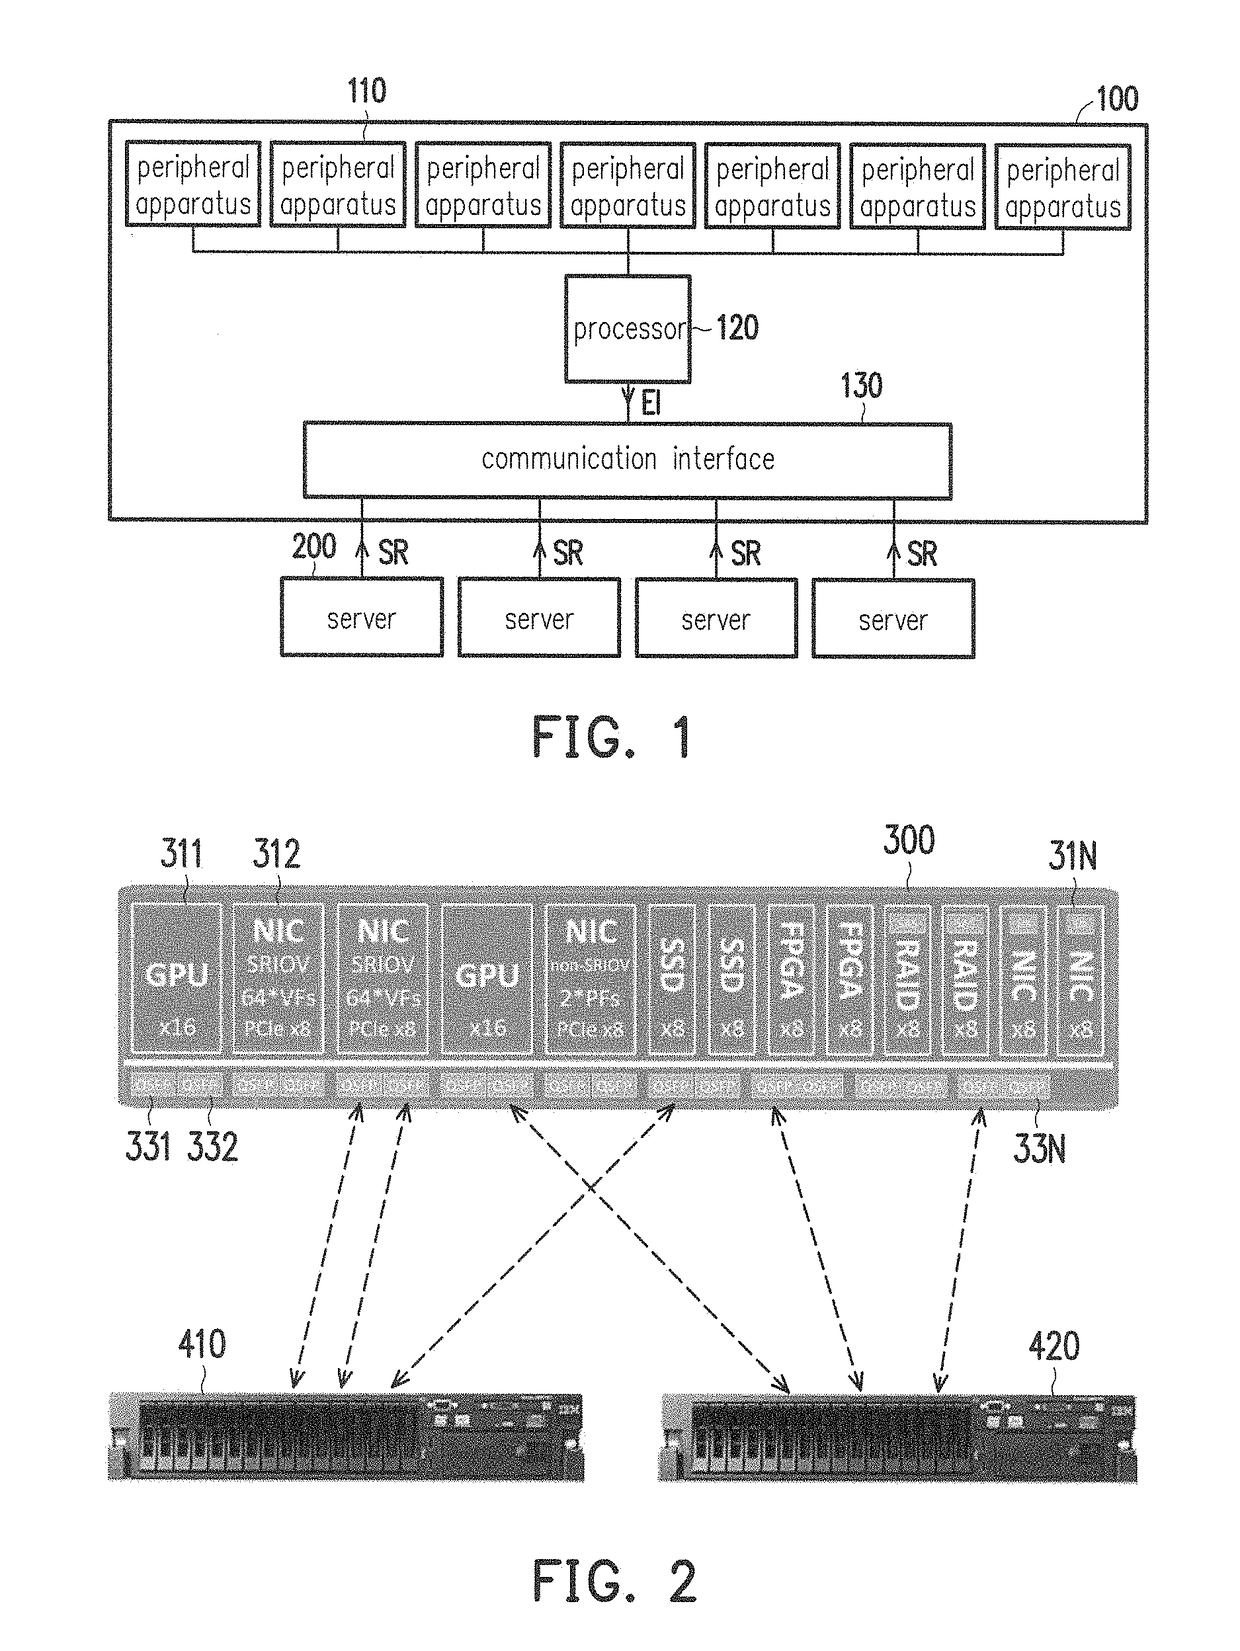 Apparatus assigning controller and apparatus assigning method